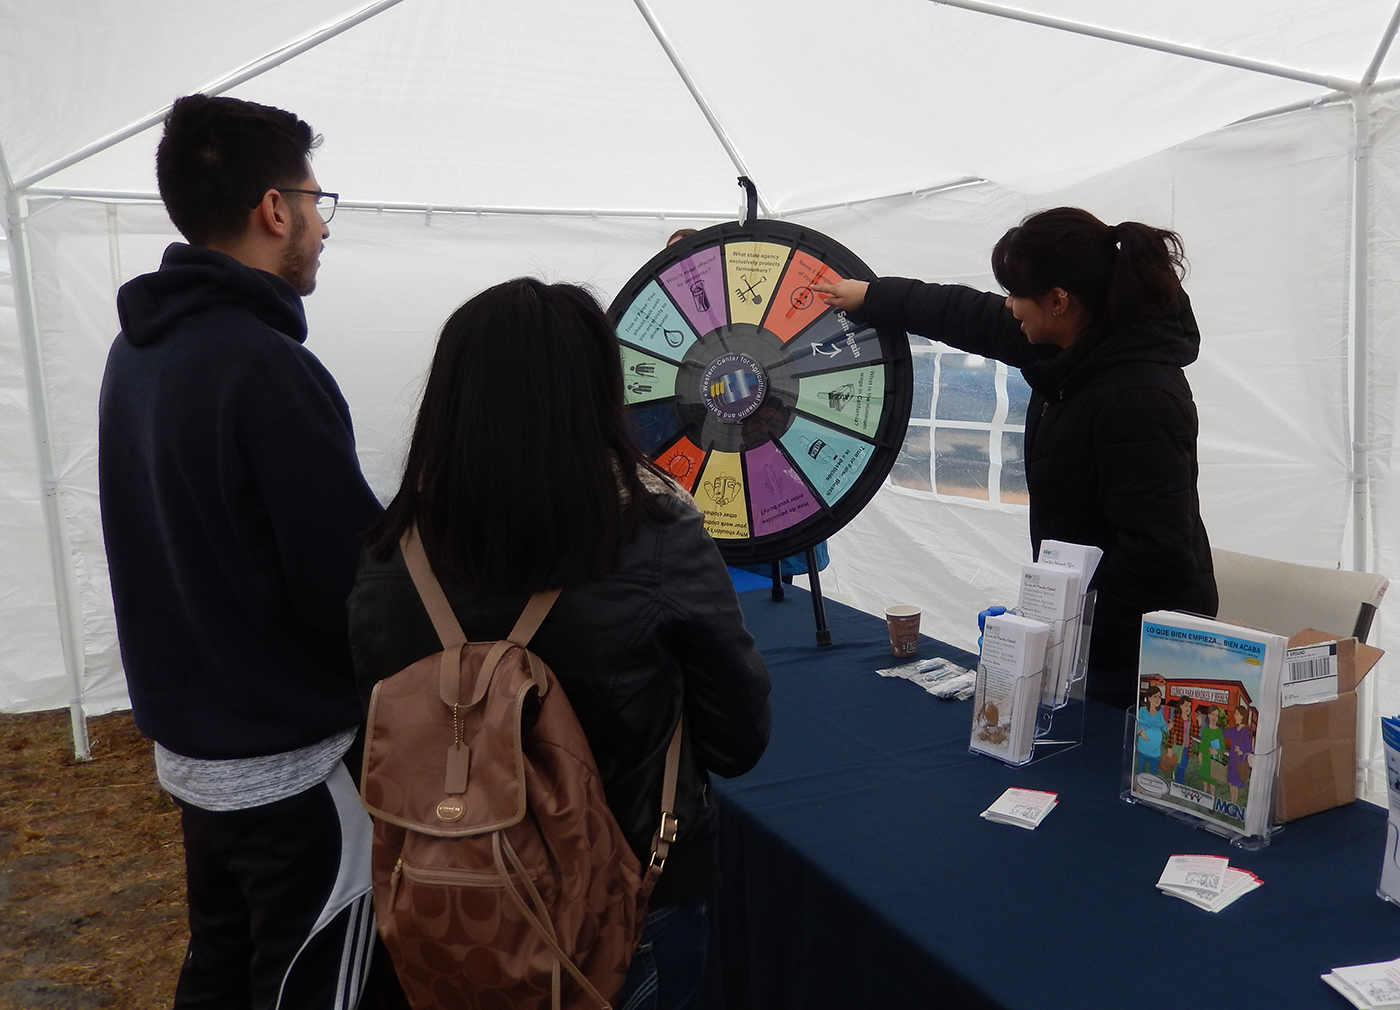 Outreach staff member, Leslie Olivares, interacts with members of the community at the WCAHS booth